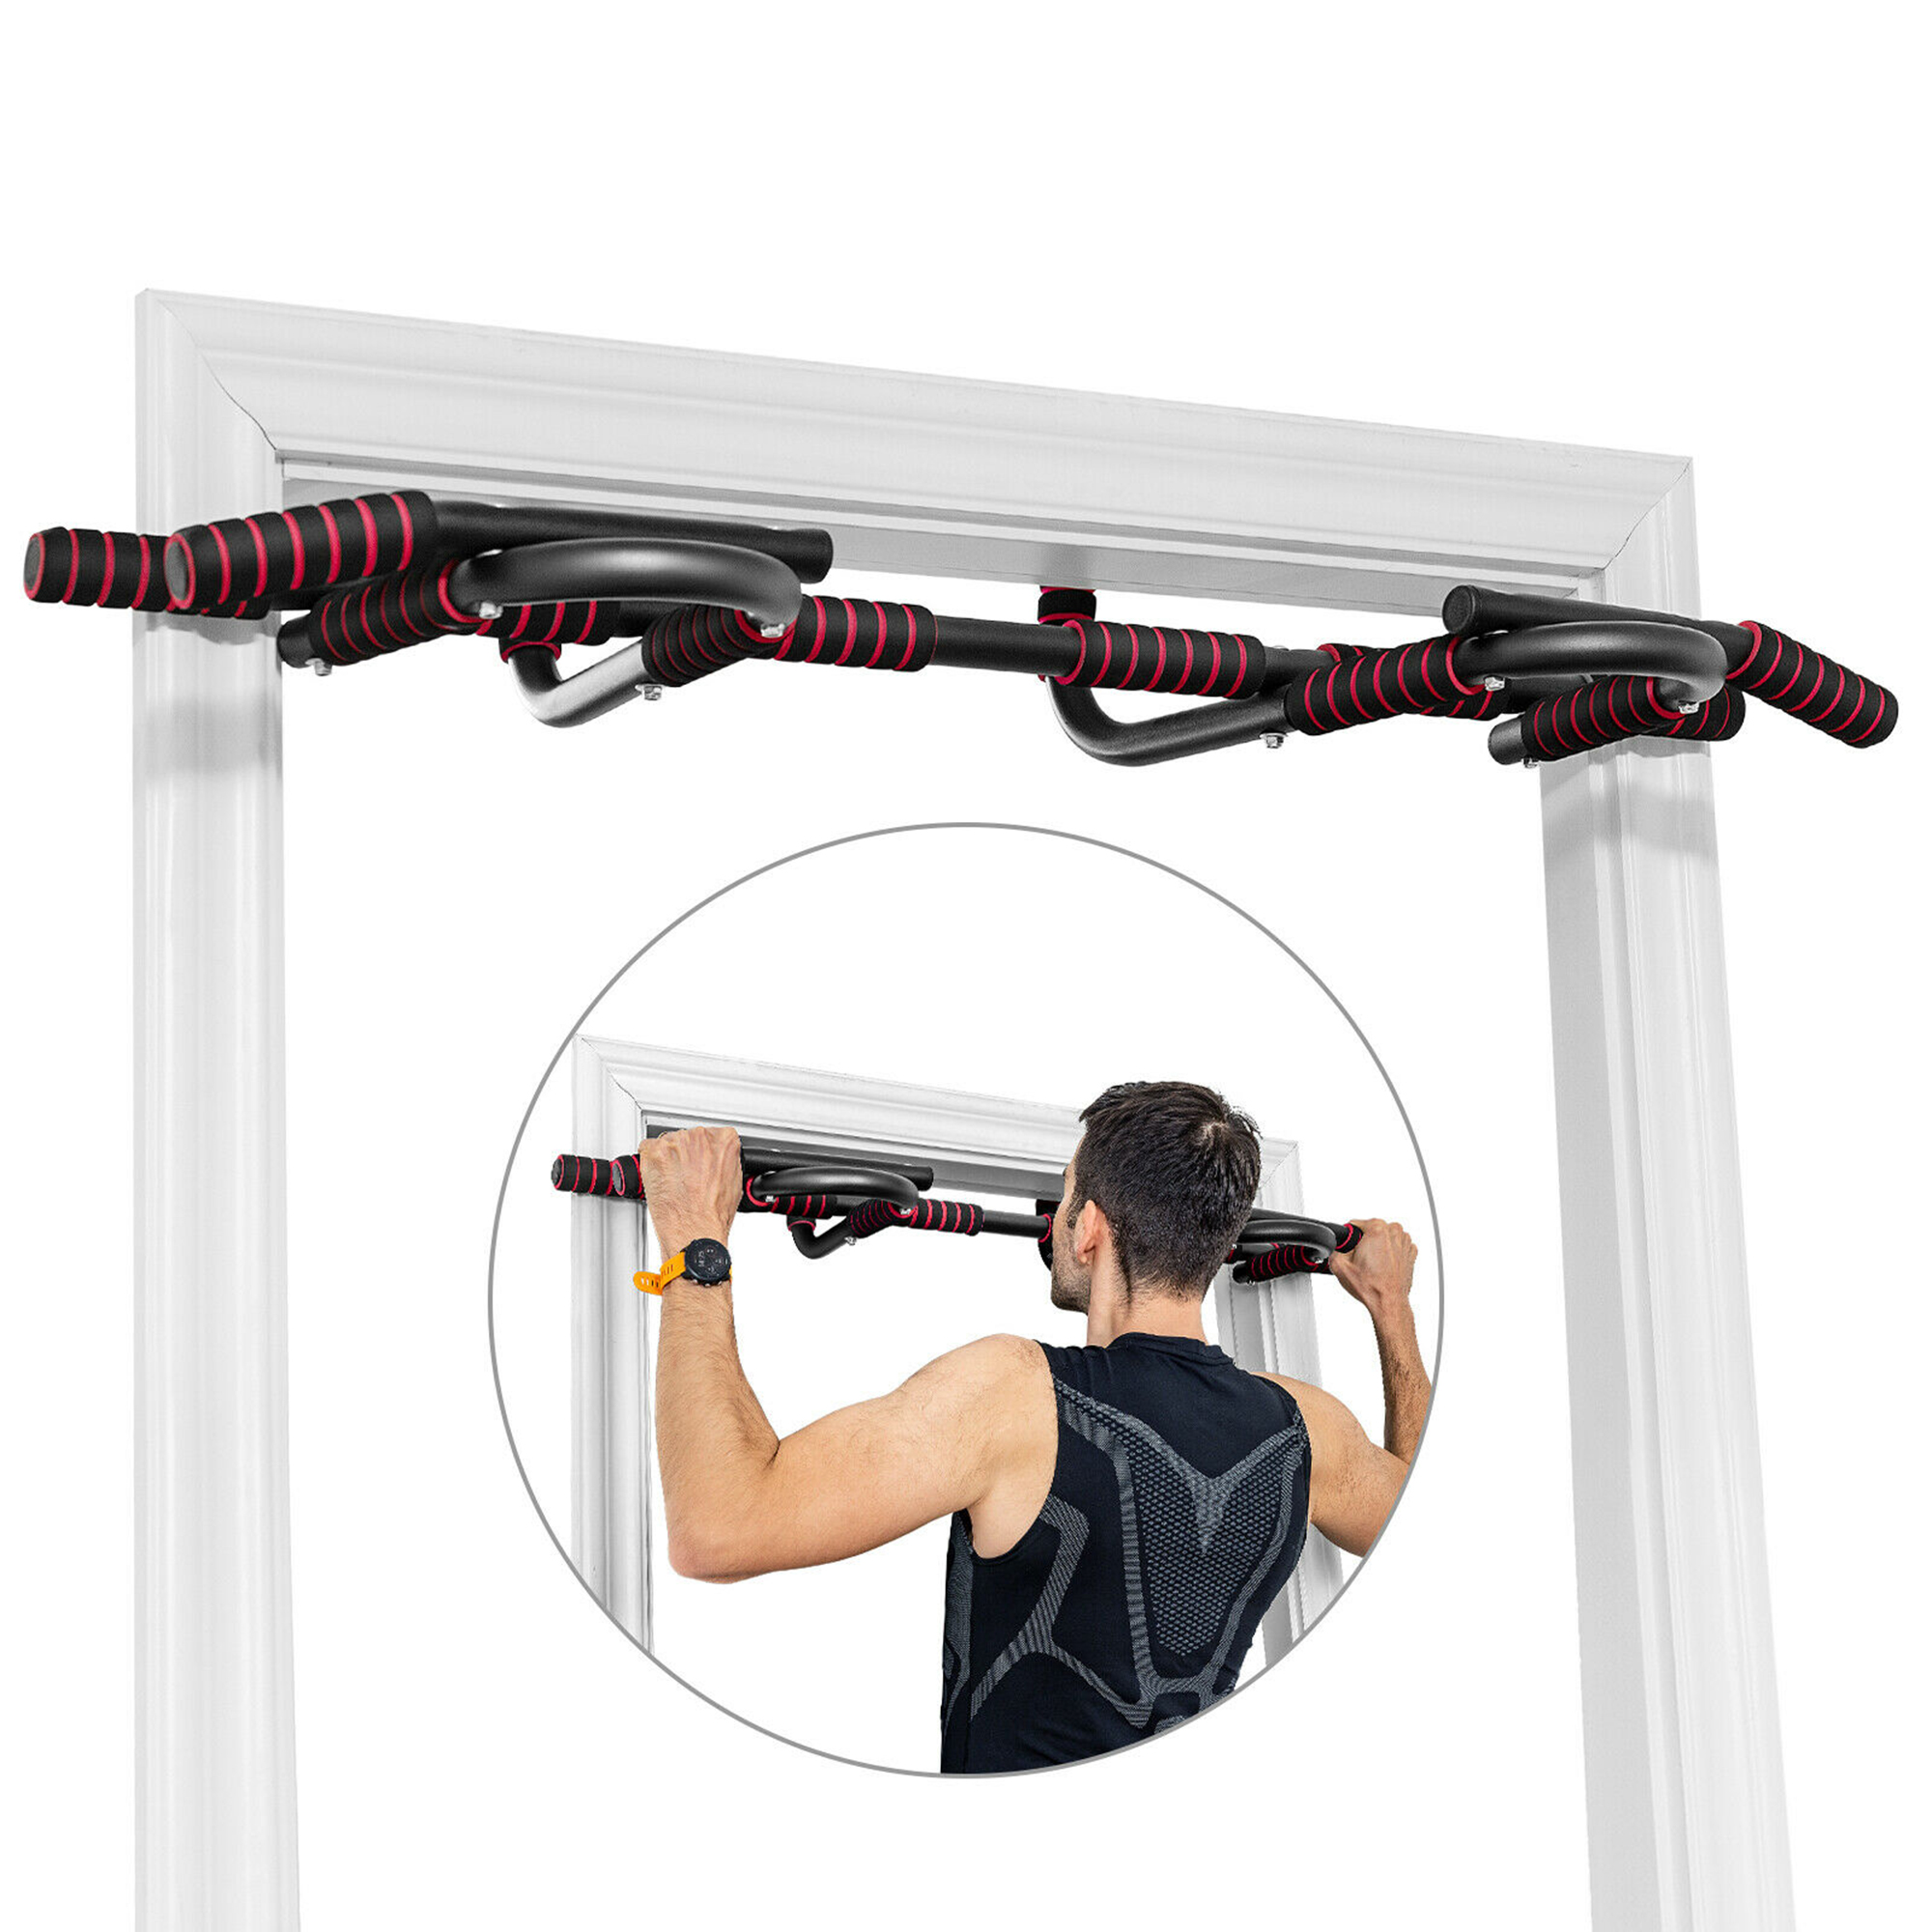 Costway Multi-Purpose Pull Up Bar Doorway Fitness Chin Up Bar No Screw Home Gym